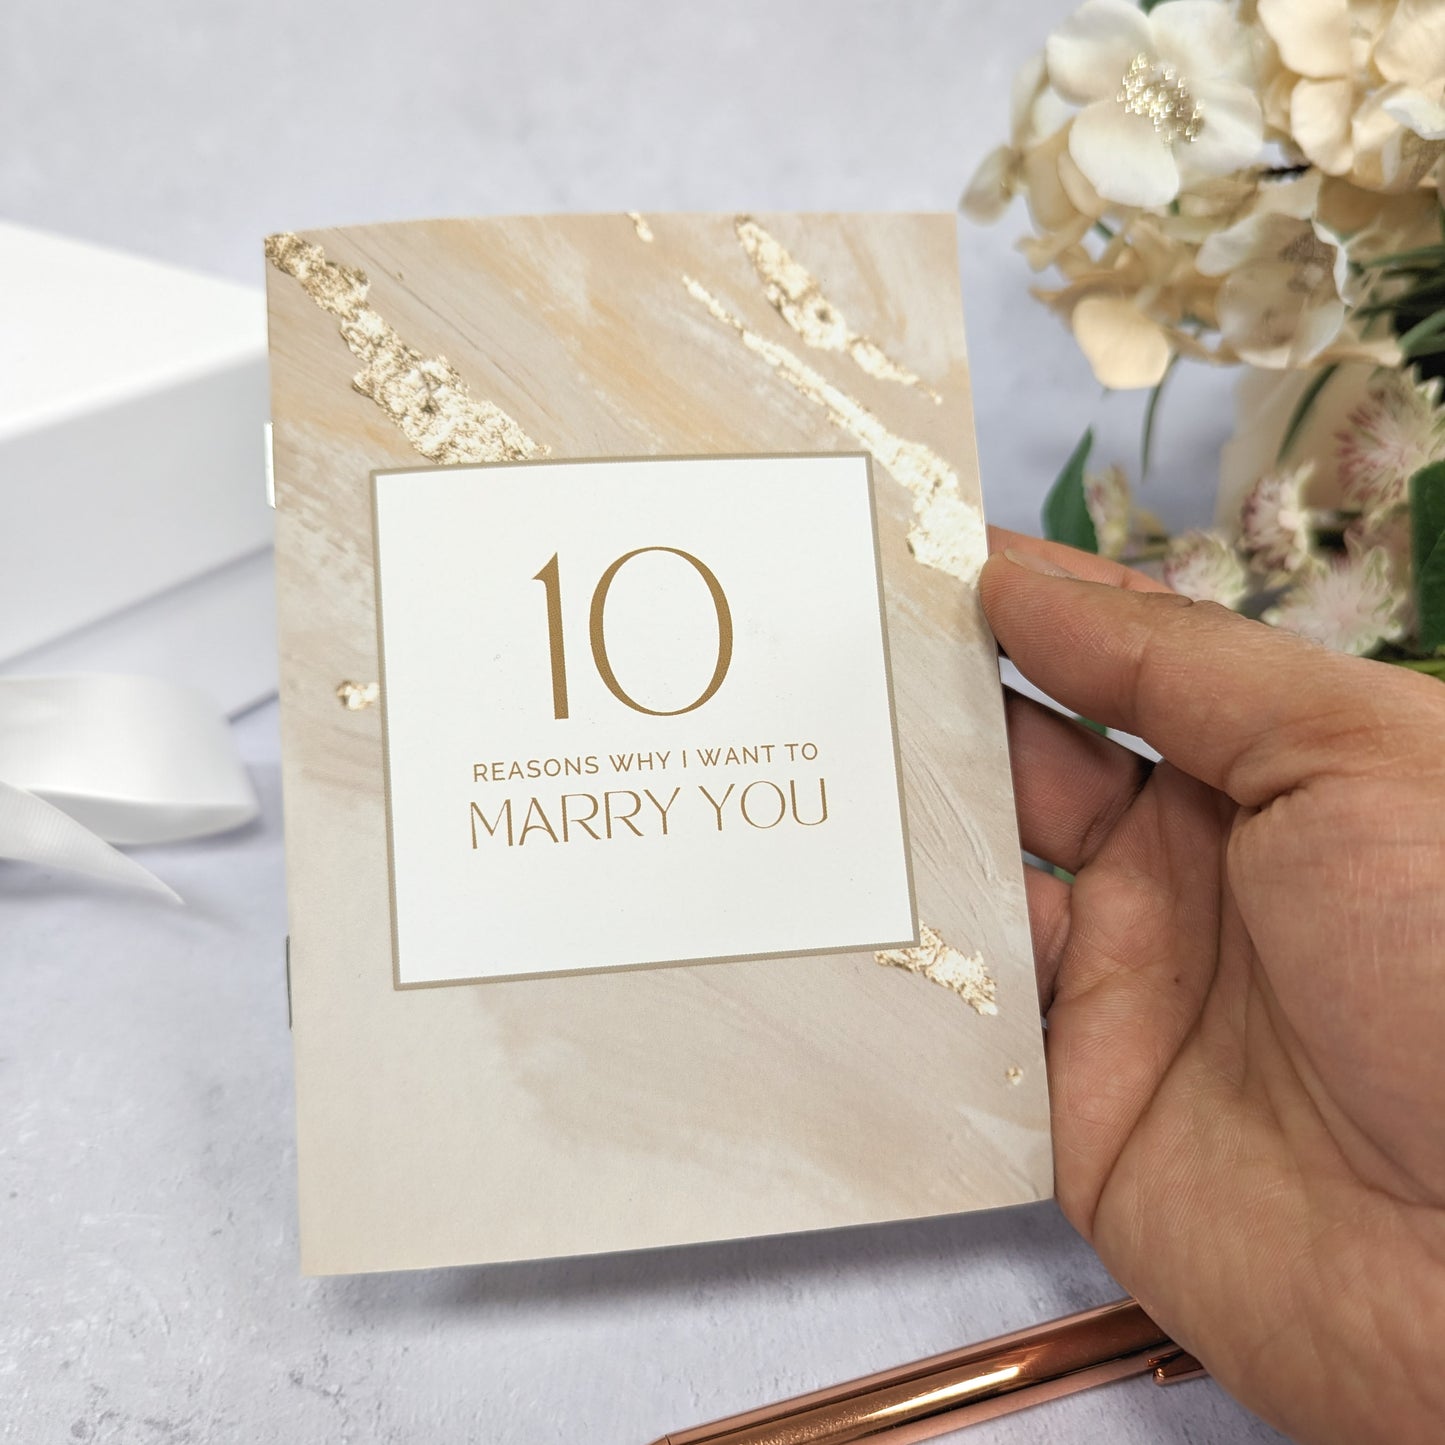 10 Reasons Why I want to Marry You - A6 Book - Wedding Proposal